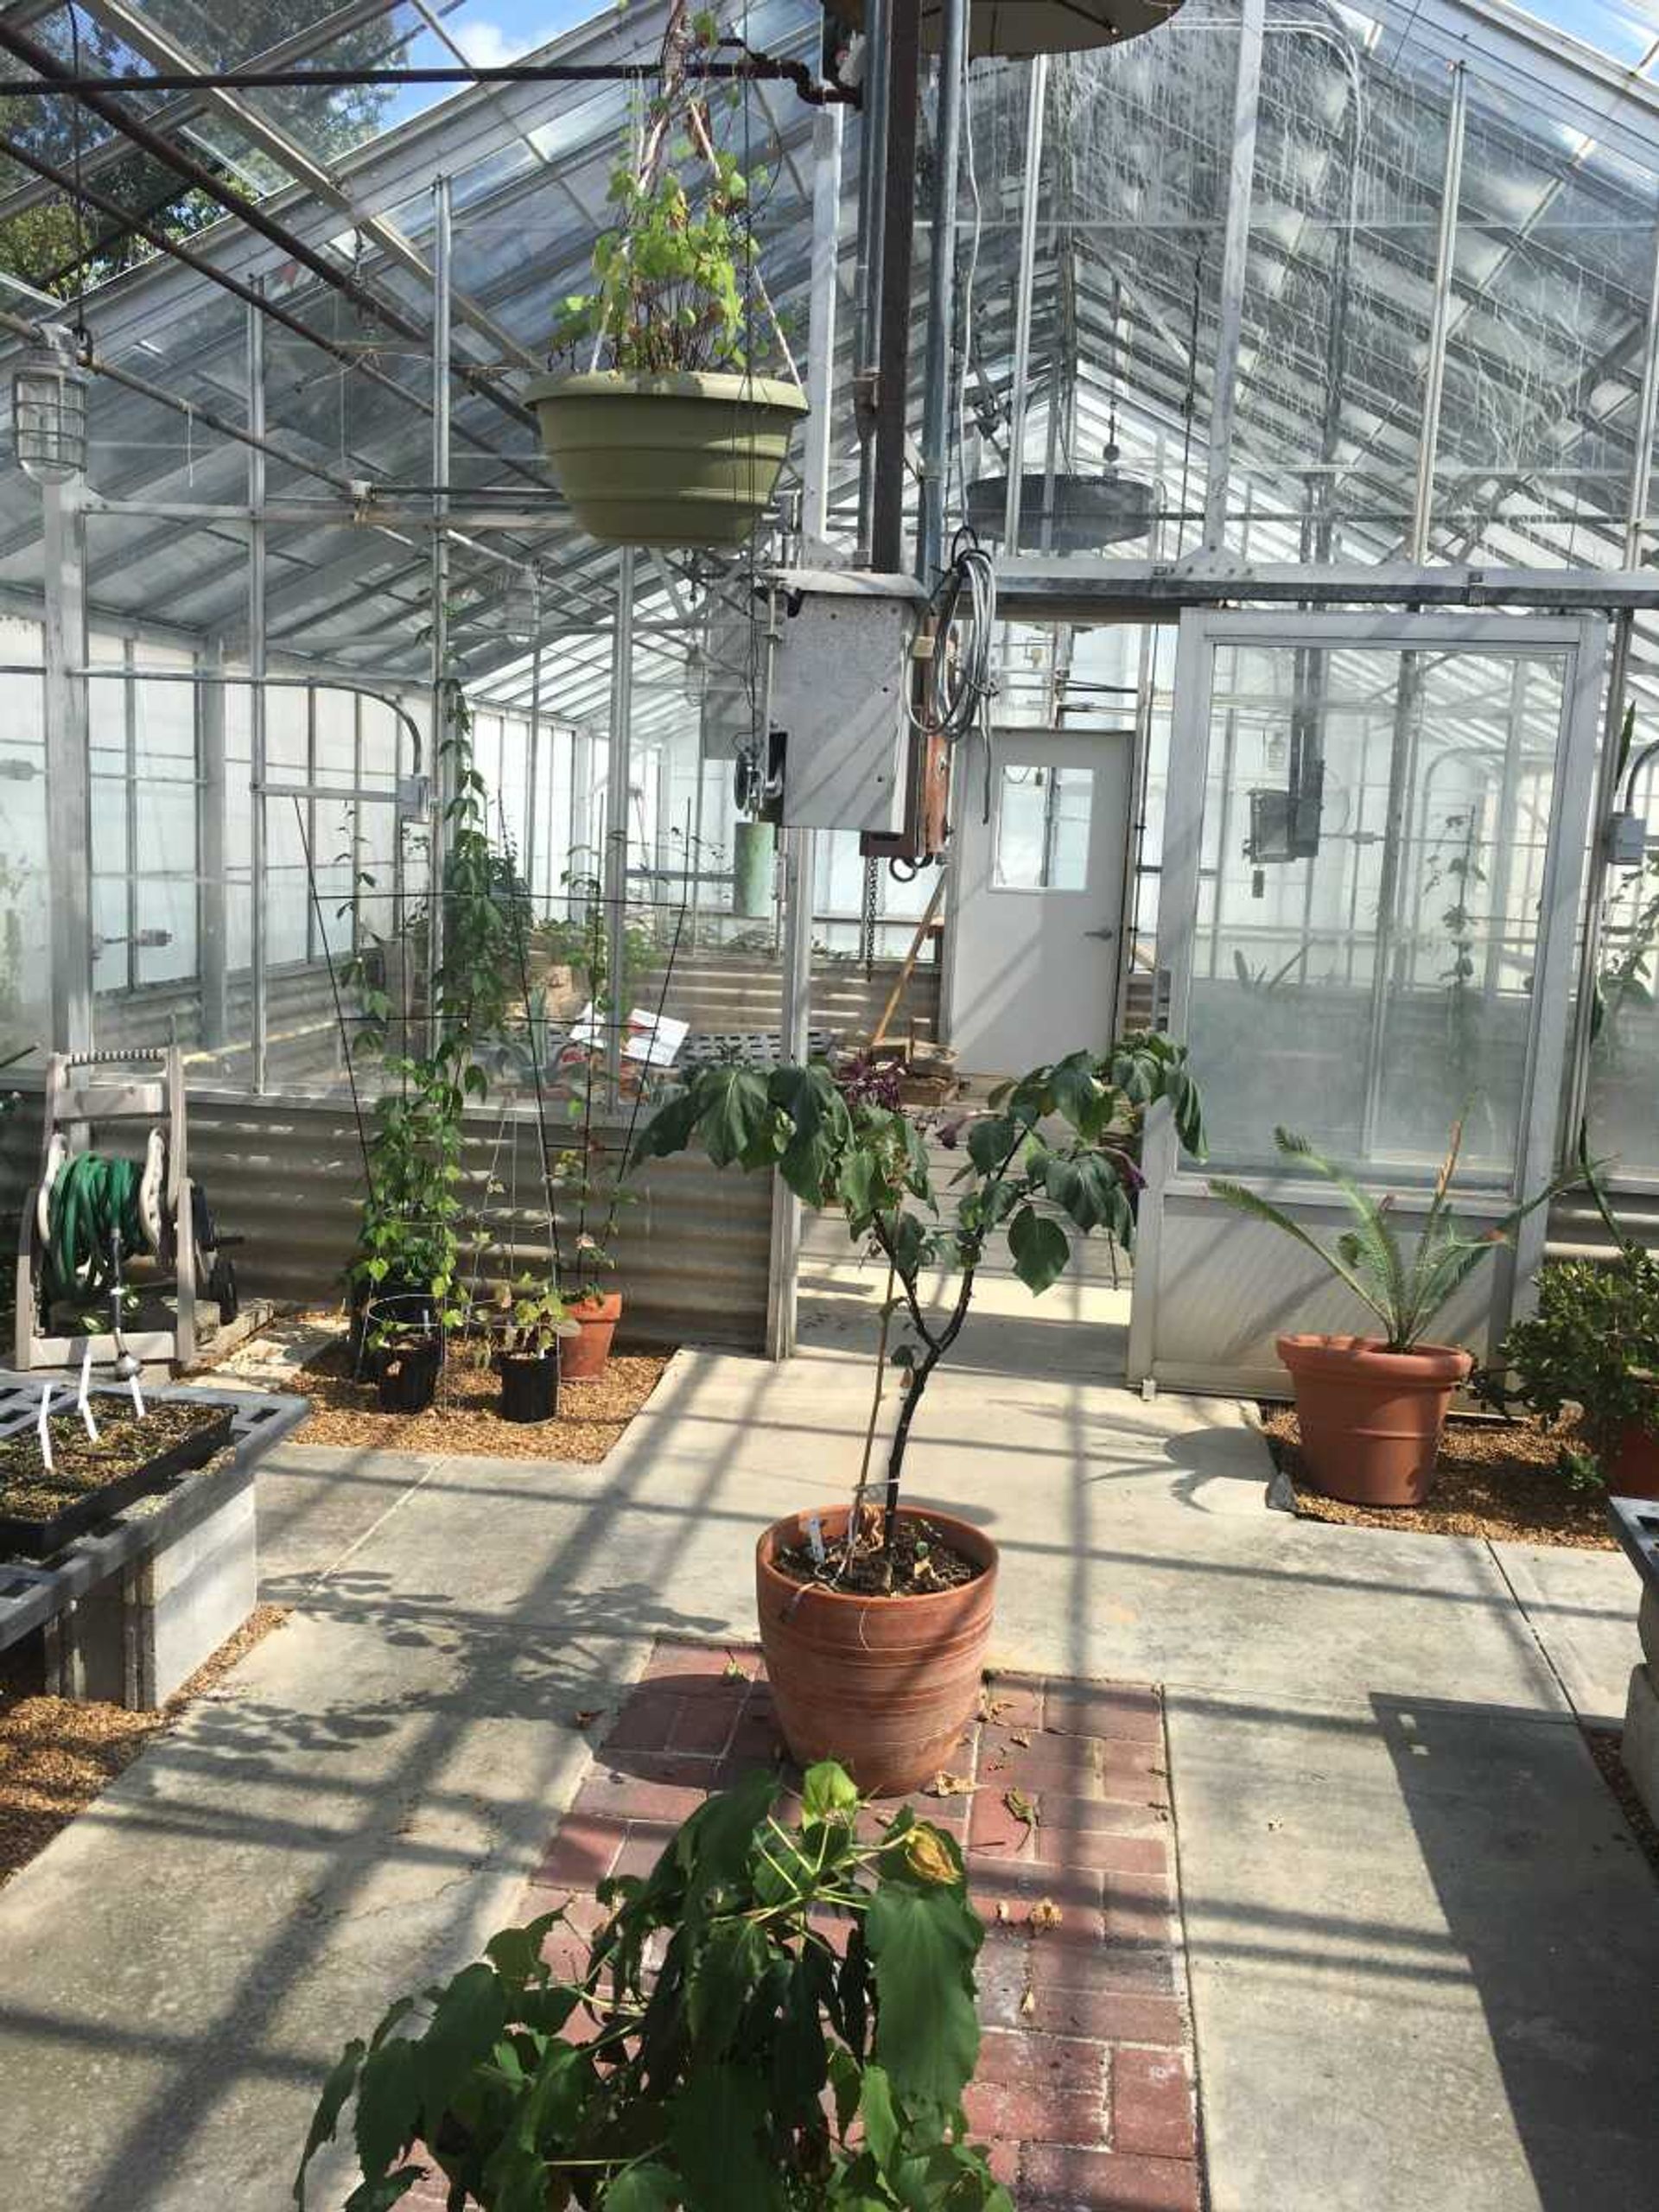 The front greenhouse, which is for teaching and to hold a diverse about of plants, got cleaned out and landscaped by students this past spring and current semester along with multiple other renovations to help the students get a hands-on experience.